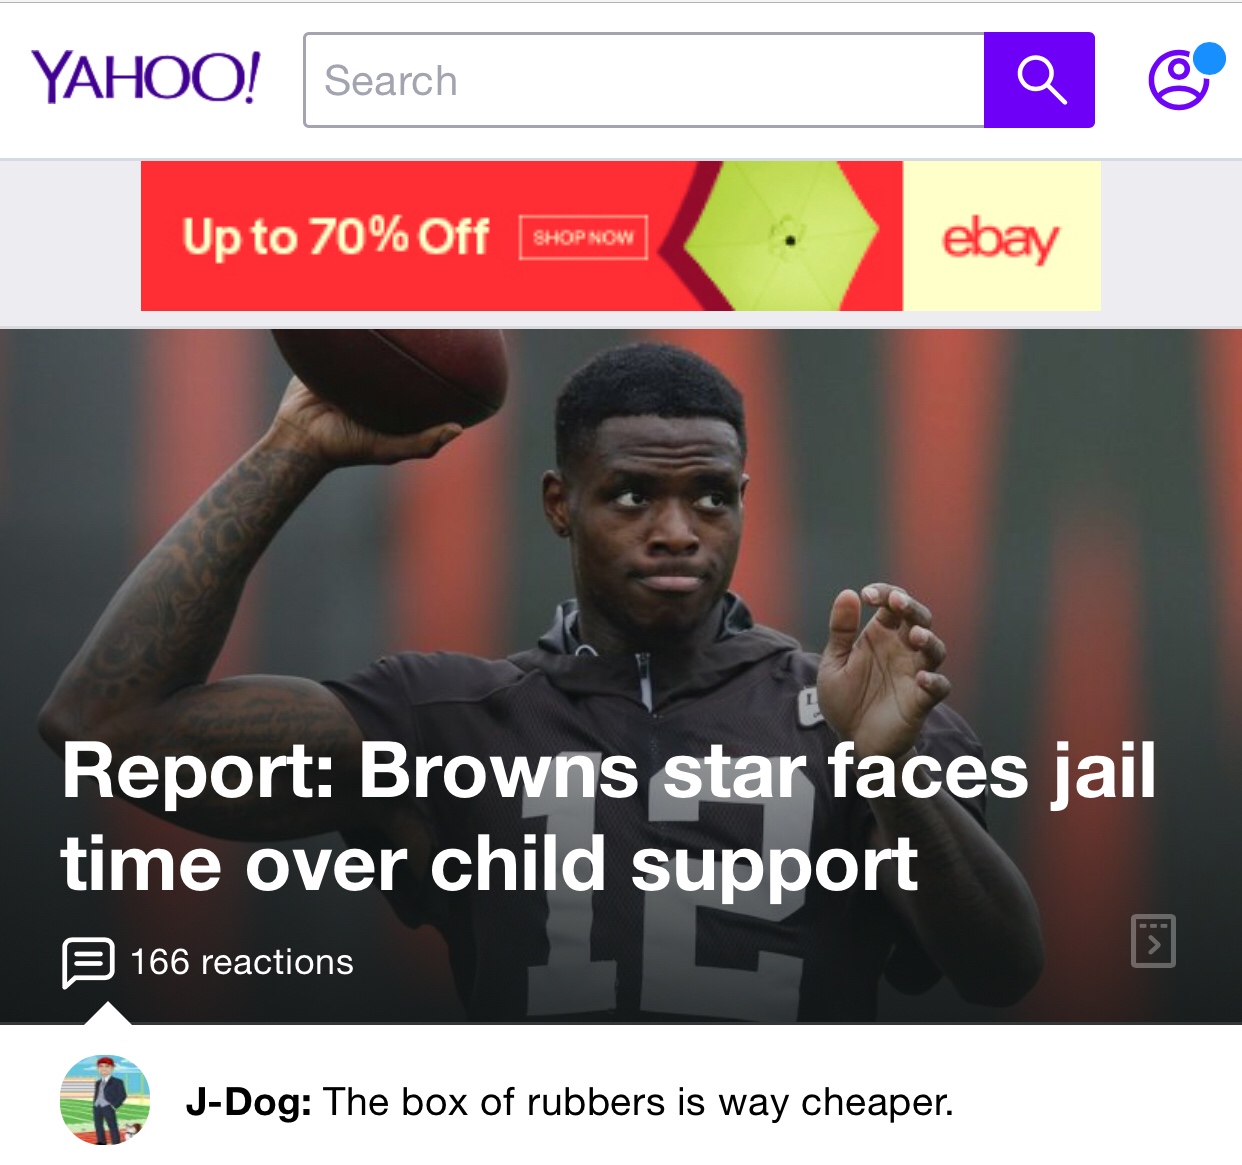 Yahoo Discovers Their Newest Feature May Not Have Been Fully Thought Out...